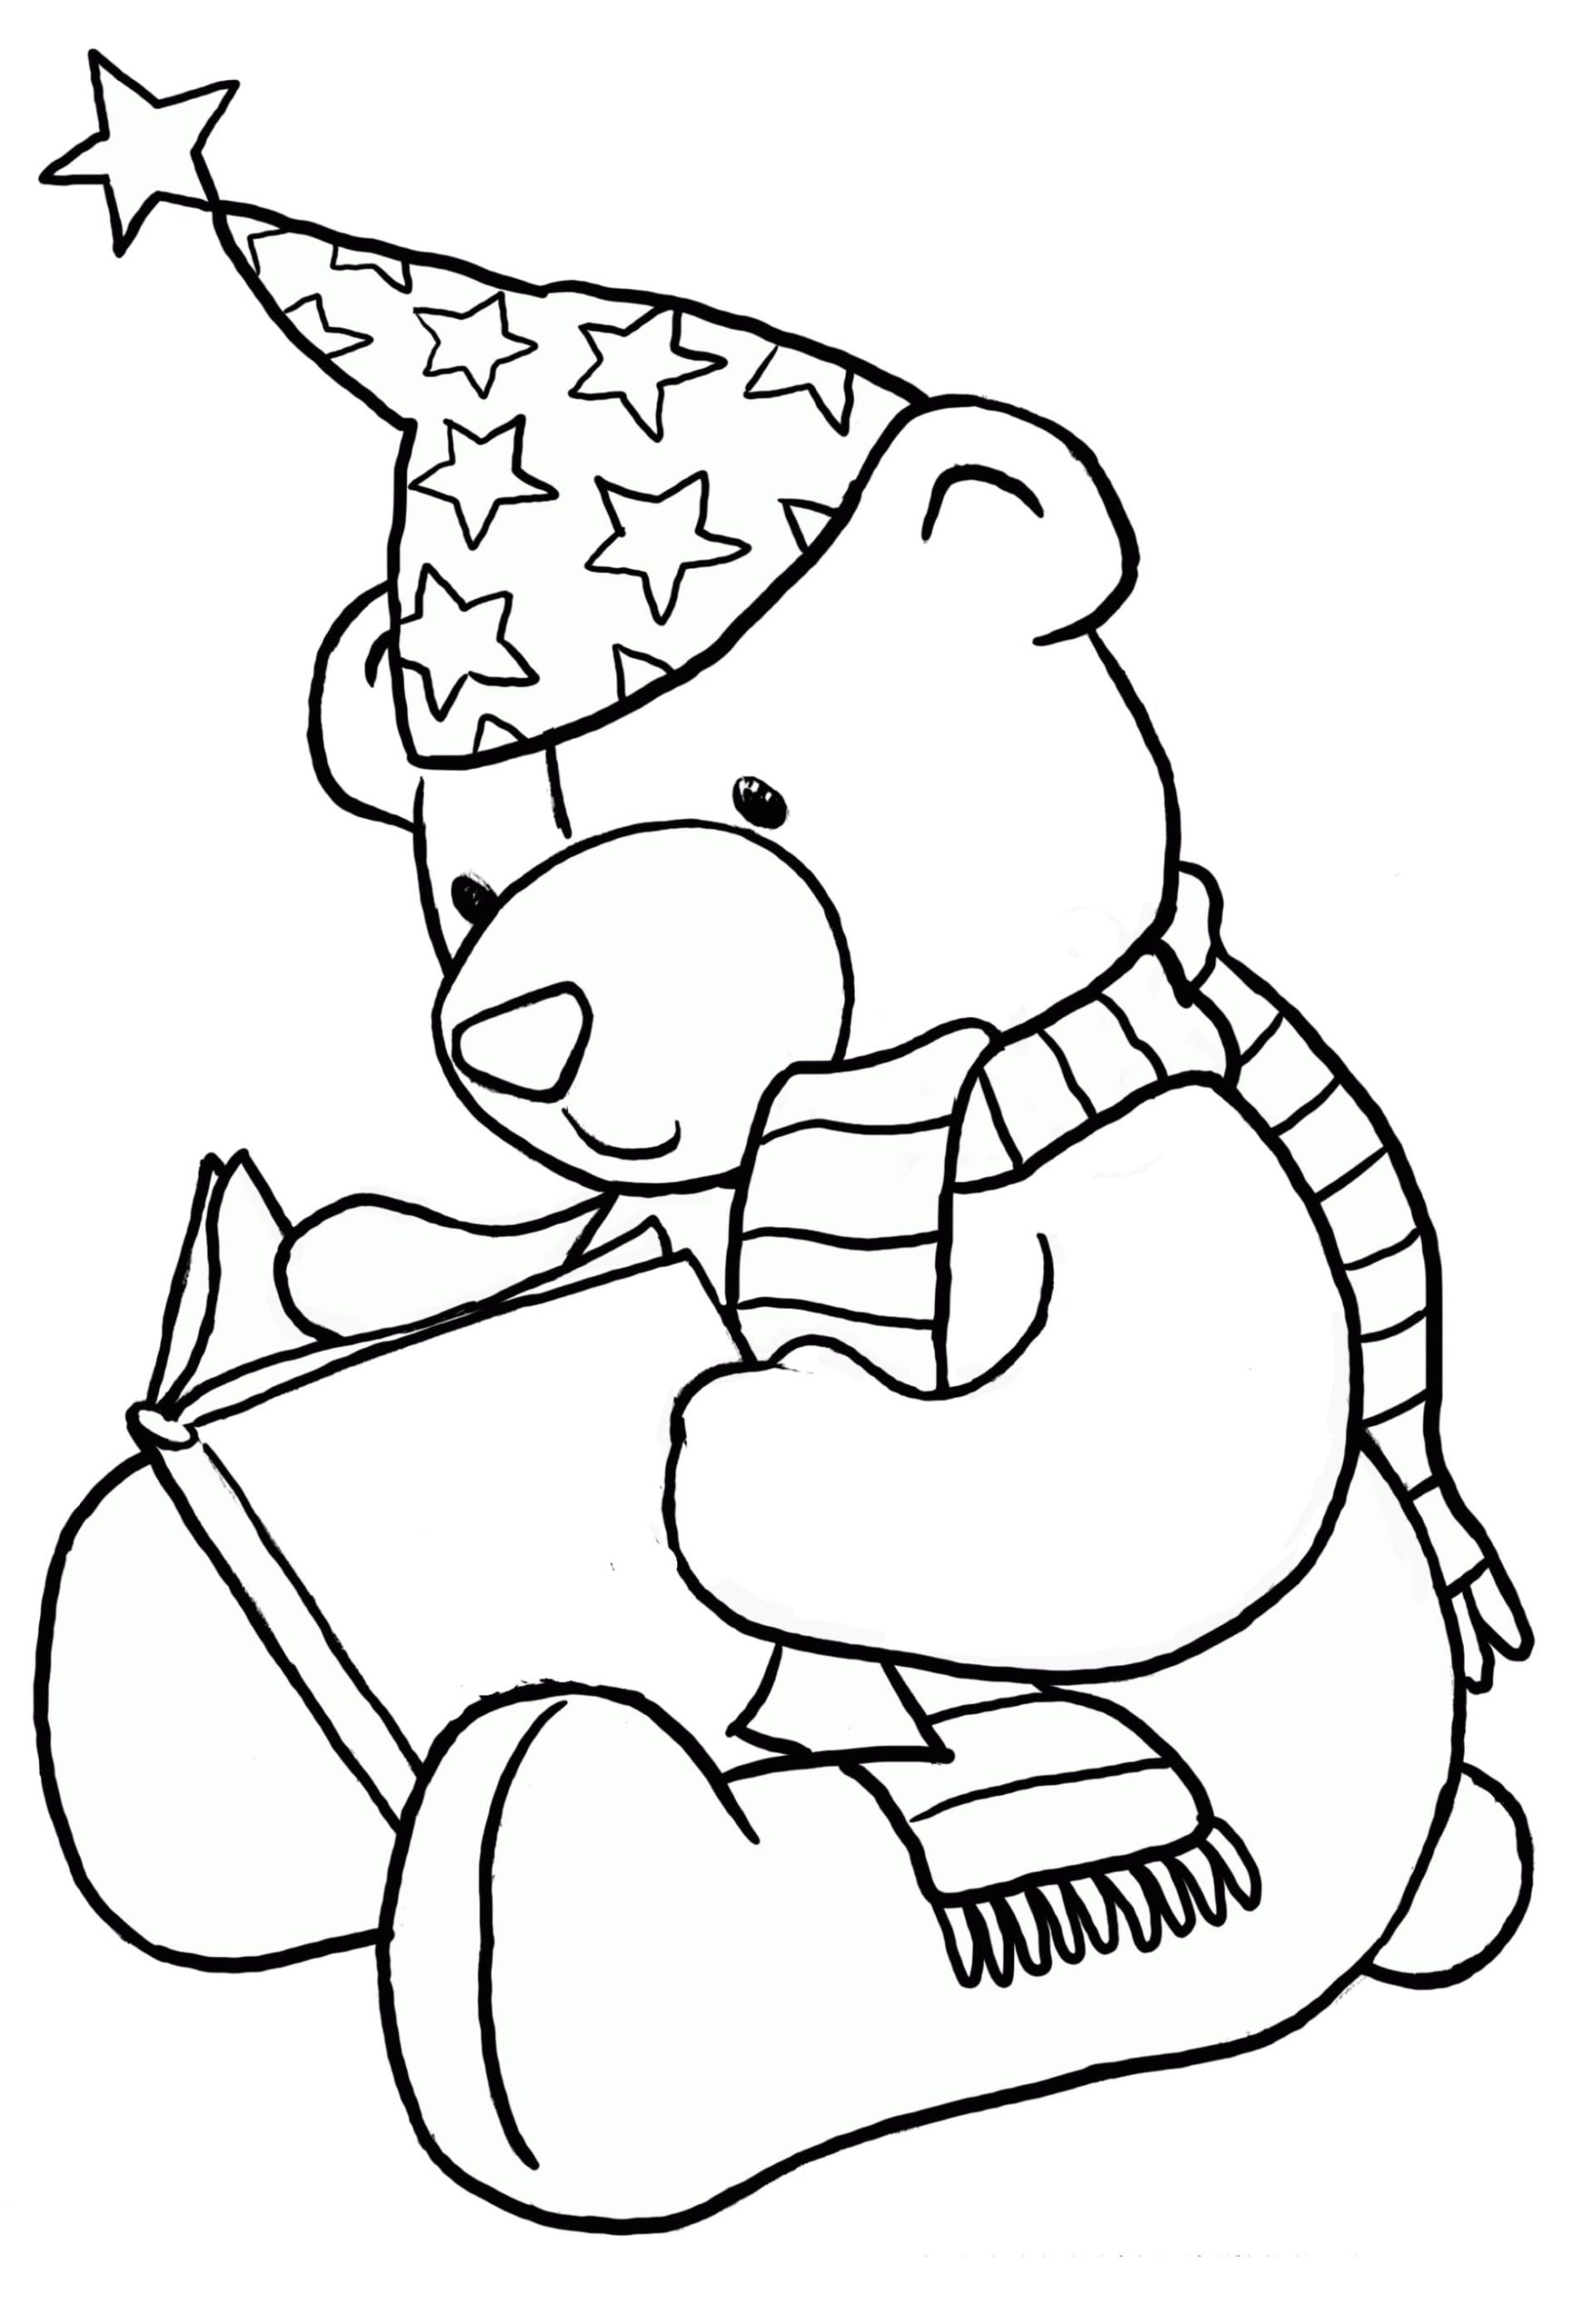 Coloring page Teddy Bears Teddy bear reads a book before going to bed